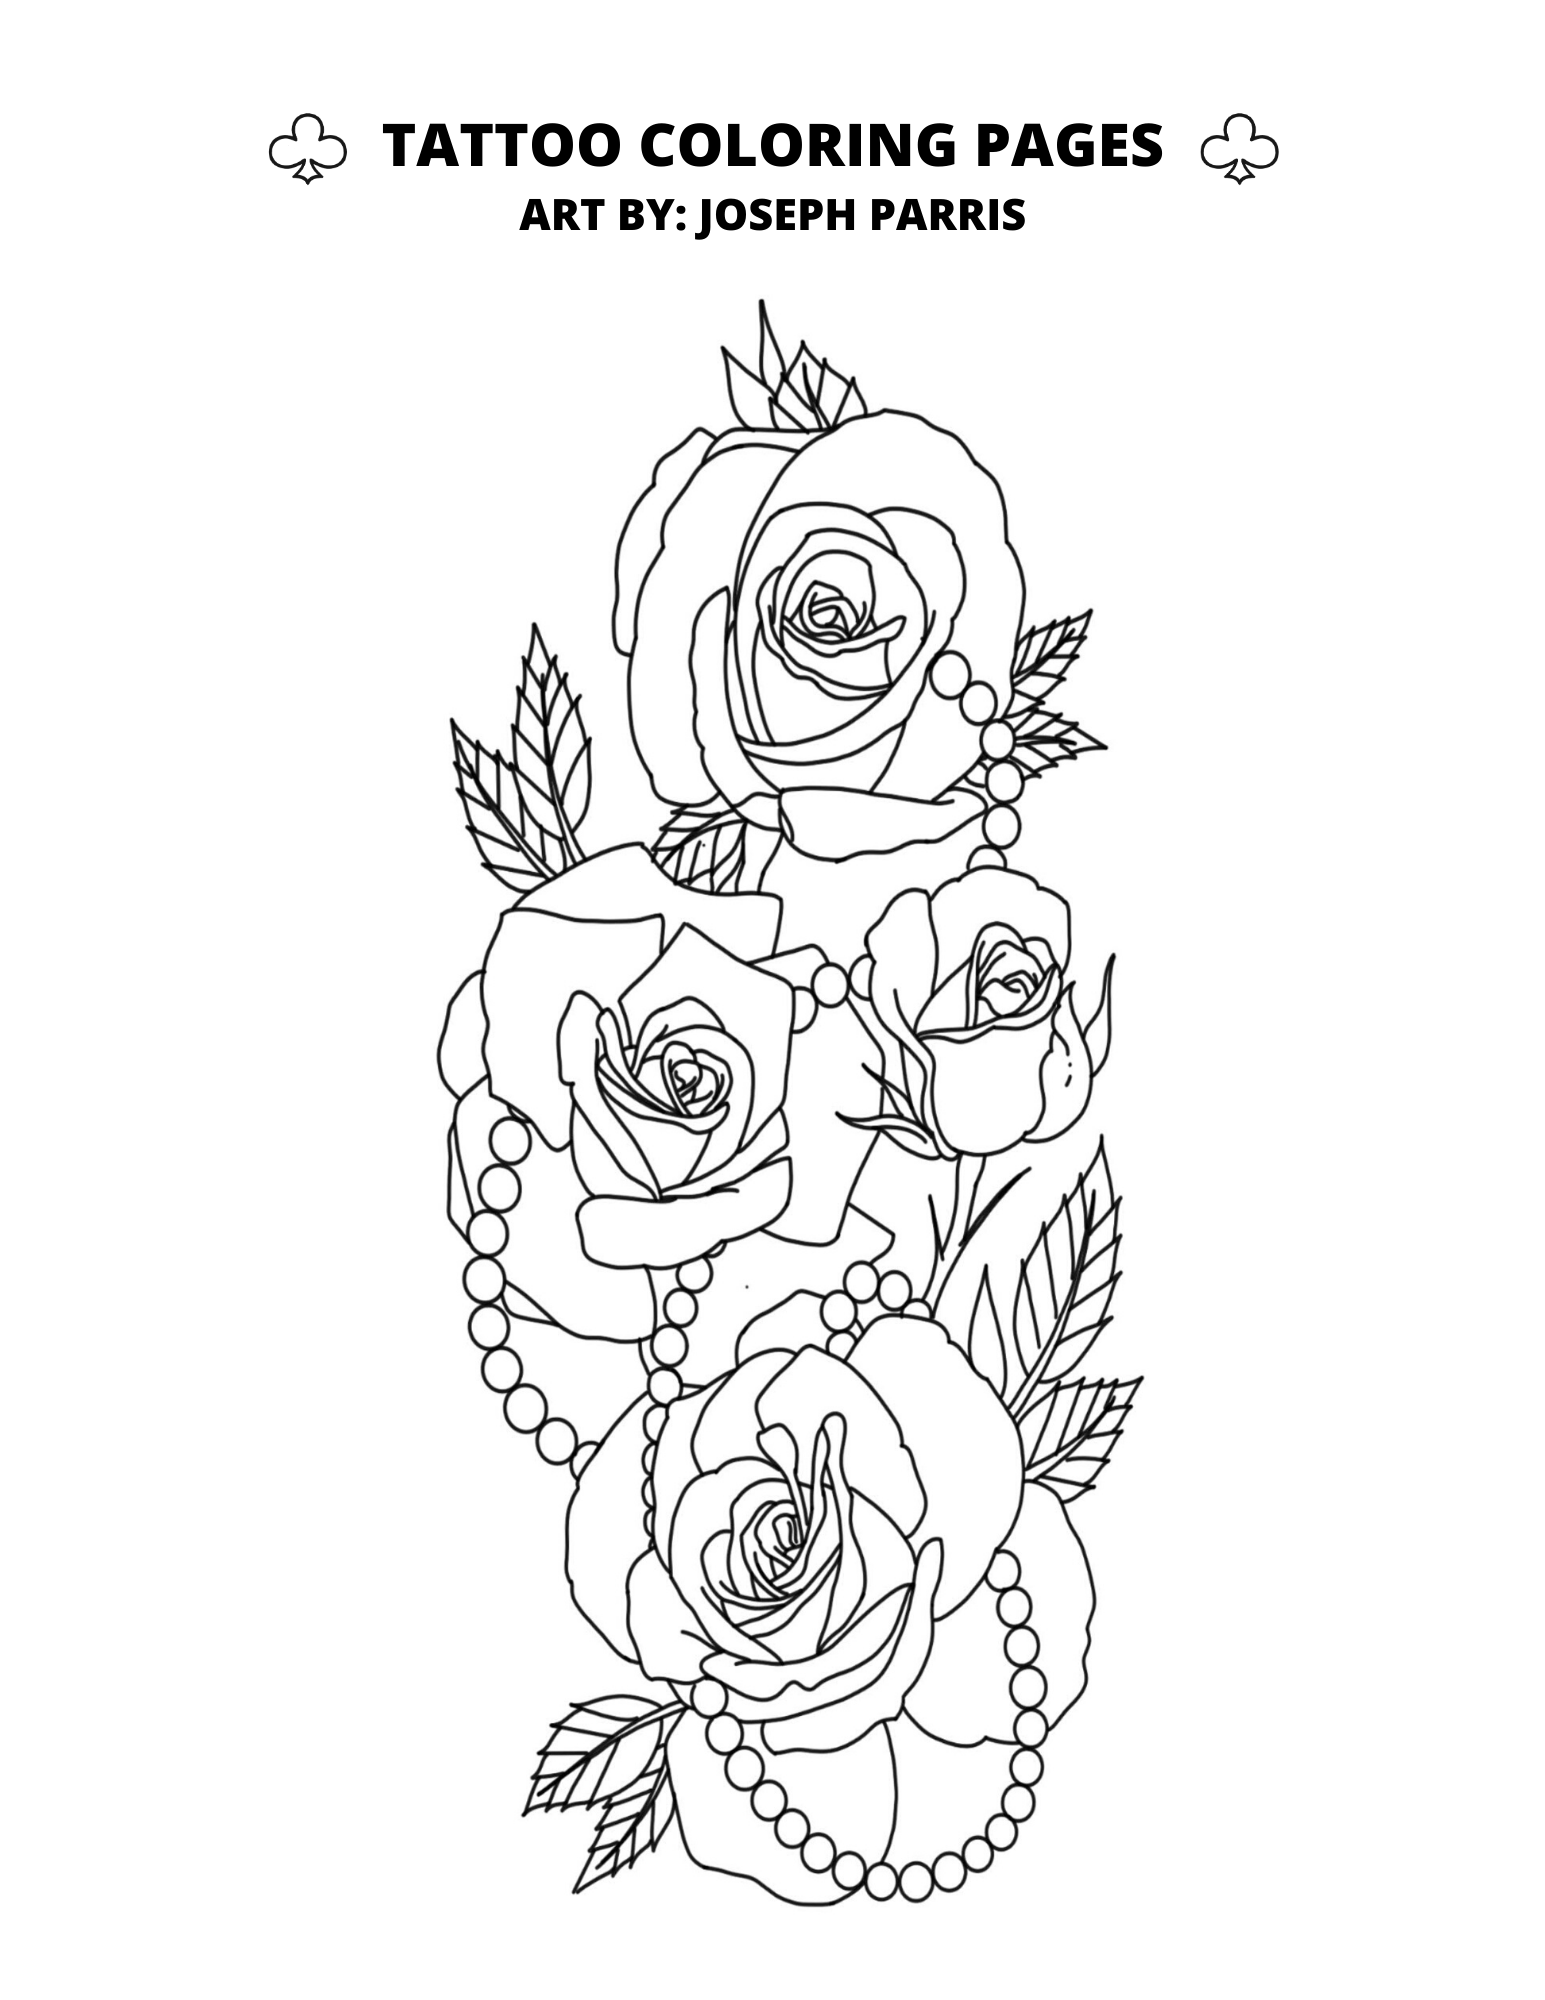 Download Tattoo Coloring Pages - Club Tattoo